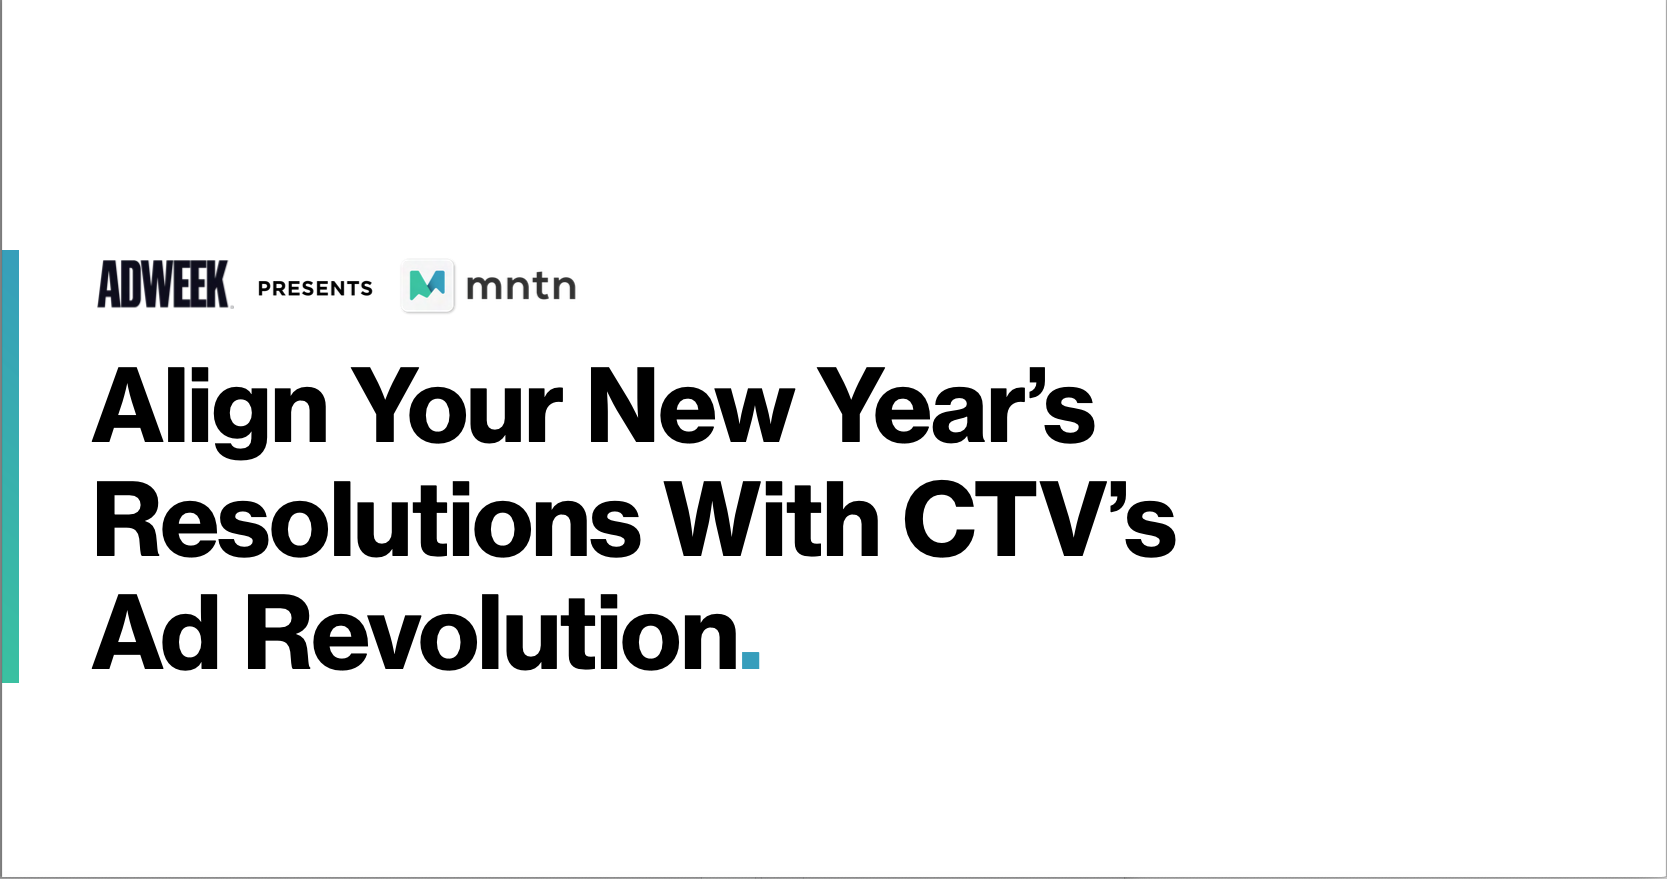 Align Your New Year’s Resolutions with CTV’s Ad Revolution